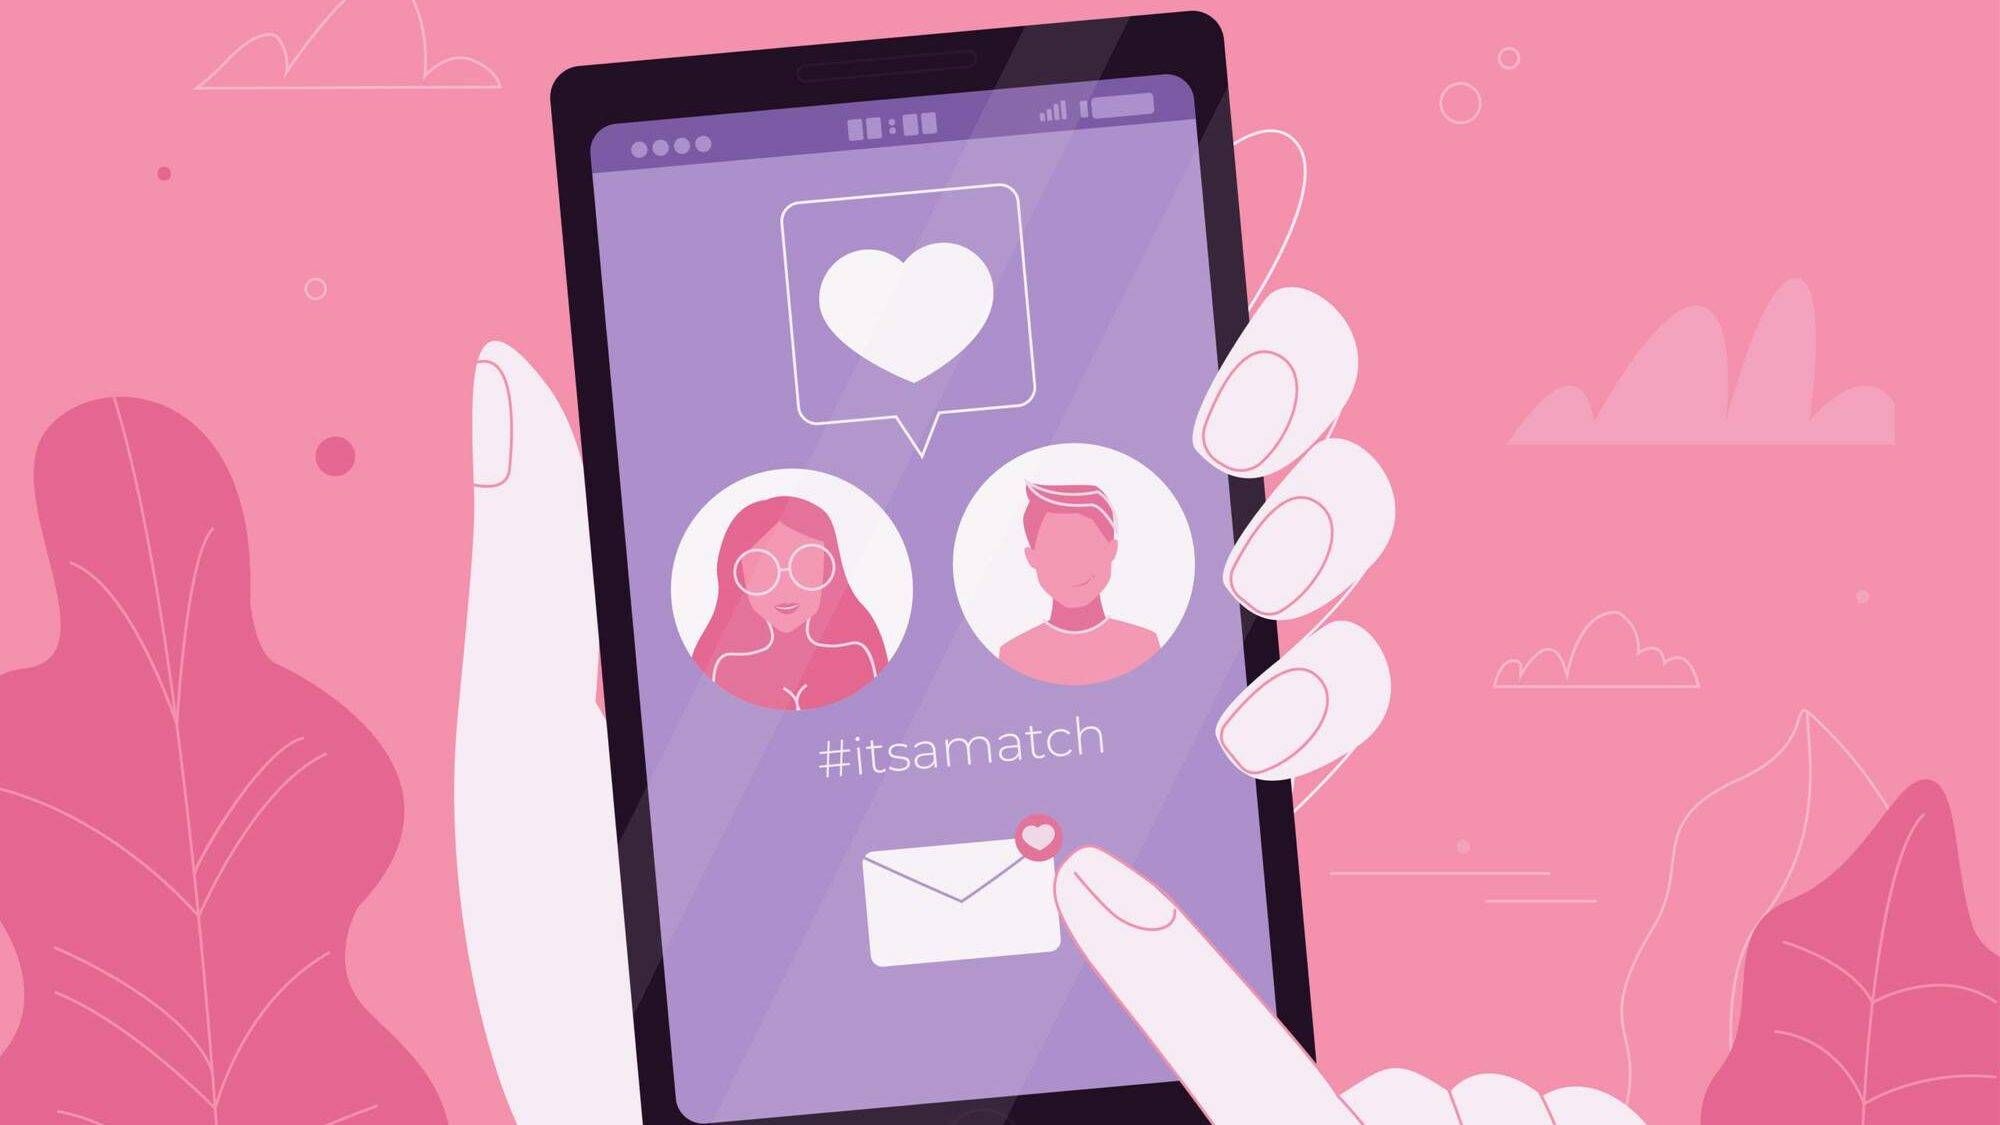 Illustration of a hand holding a smartphone with a dating app match displayed